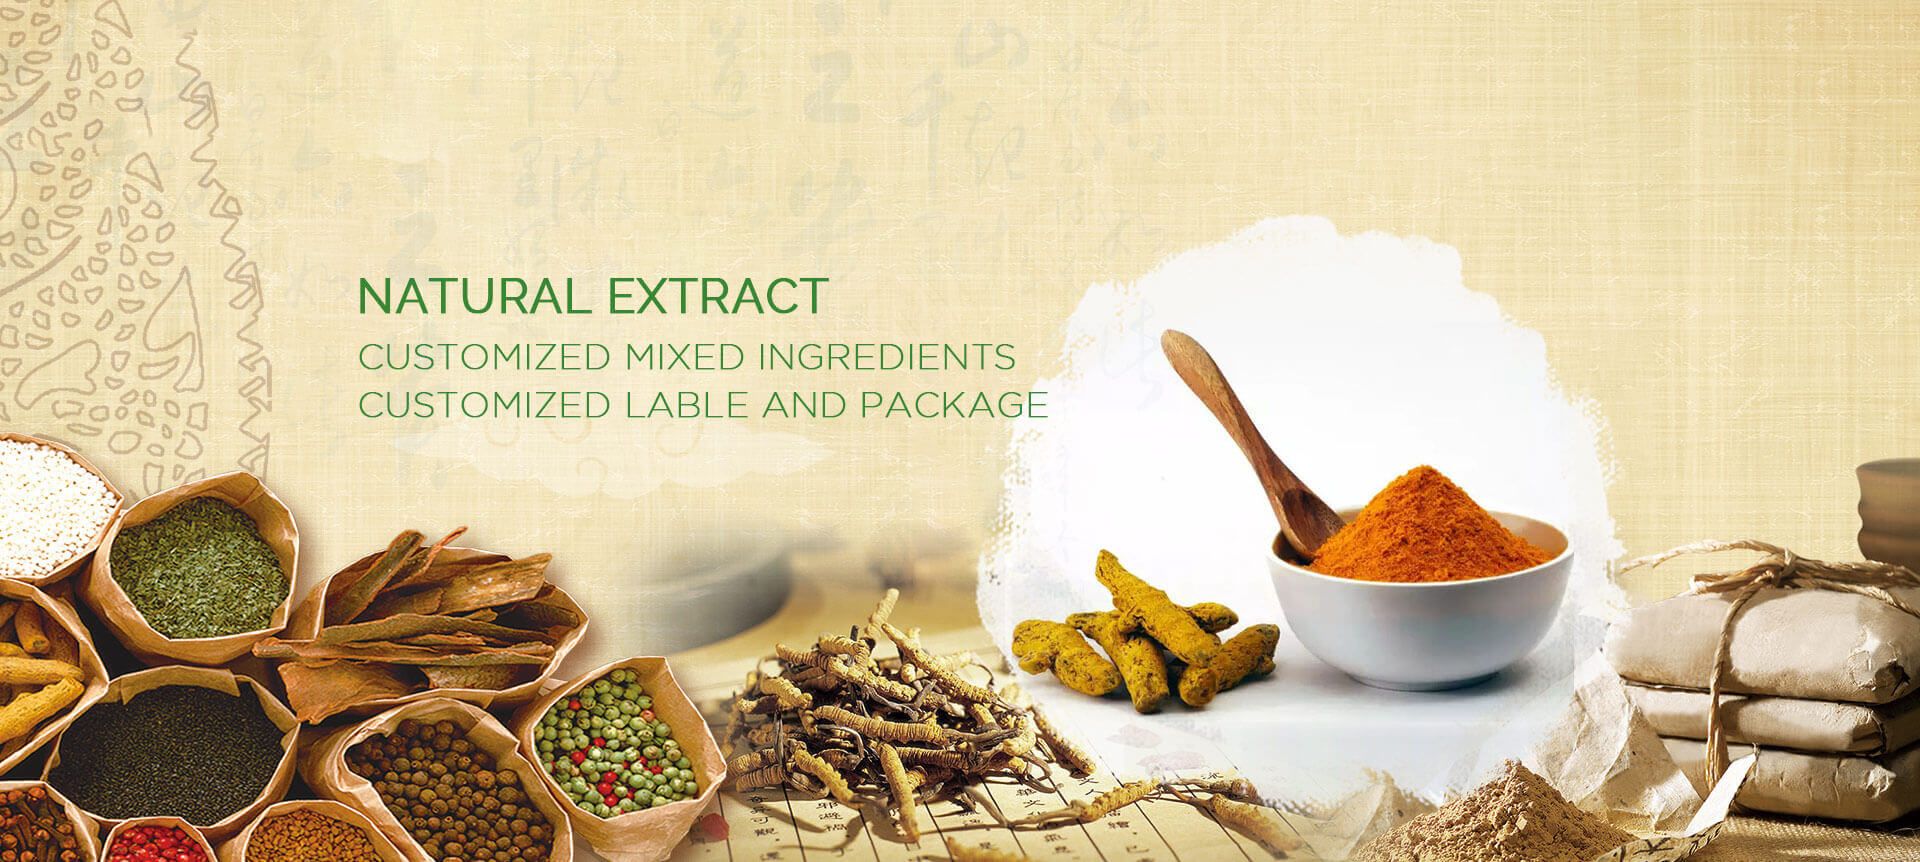 Natural Extract